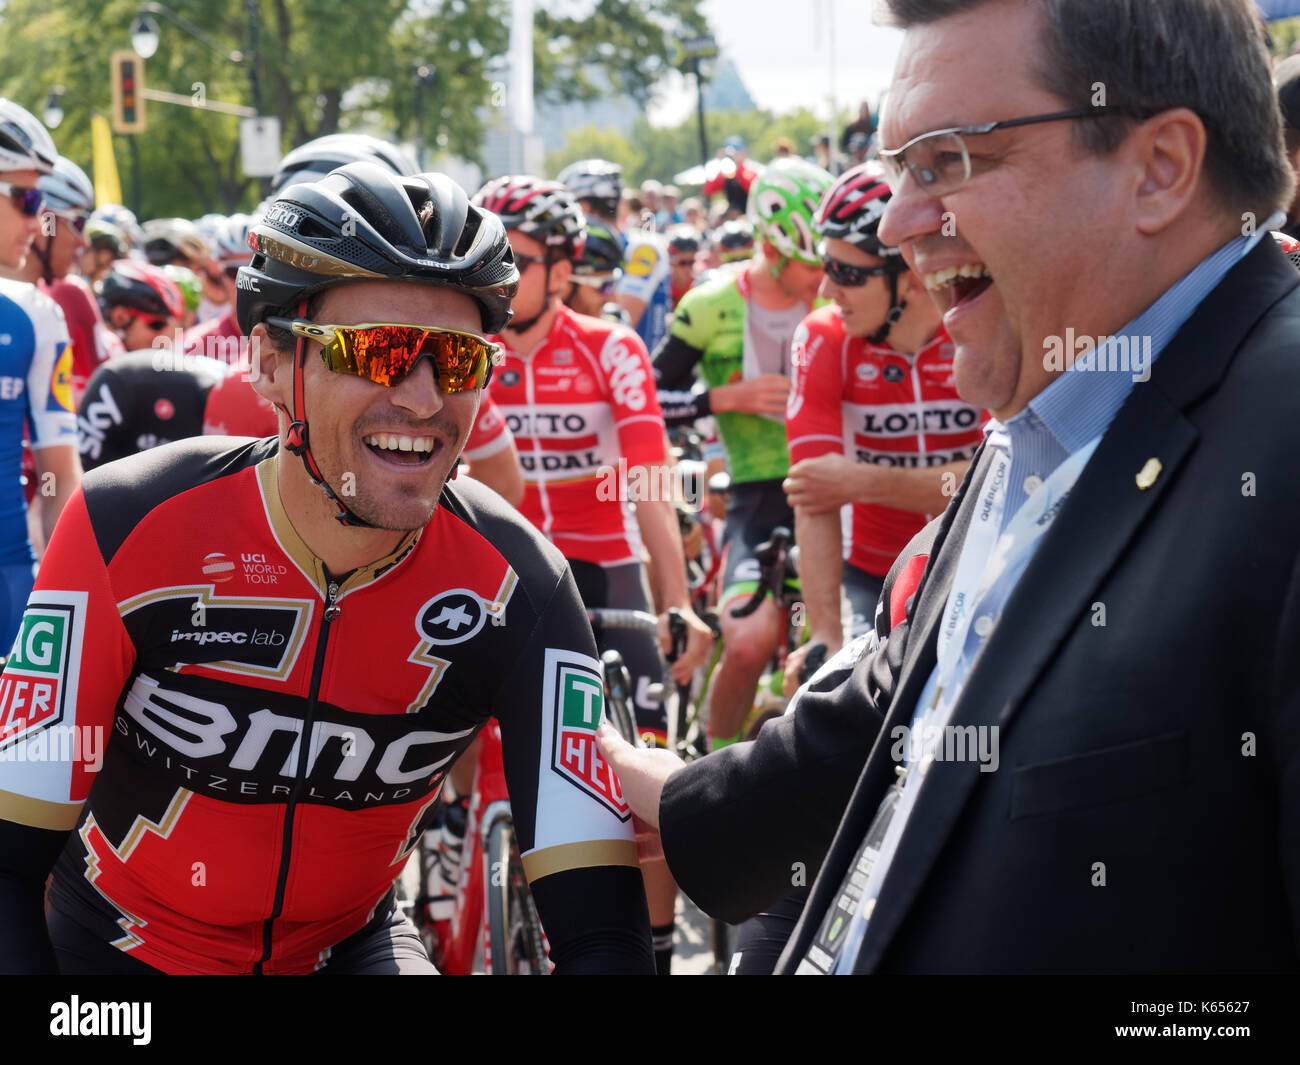 Montreal, Canada. 10/09/2017. Greg Van Avermaet chats with the mayor of Montreal Denis Coderre at the start line of the Grand Prix Cycliste race in Mo Stock Photo